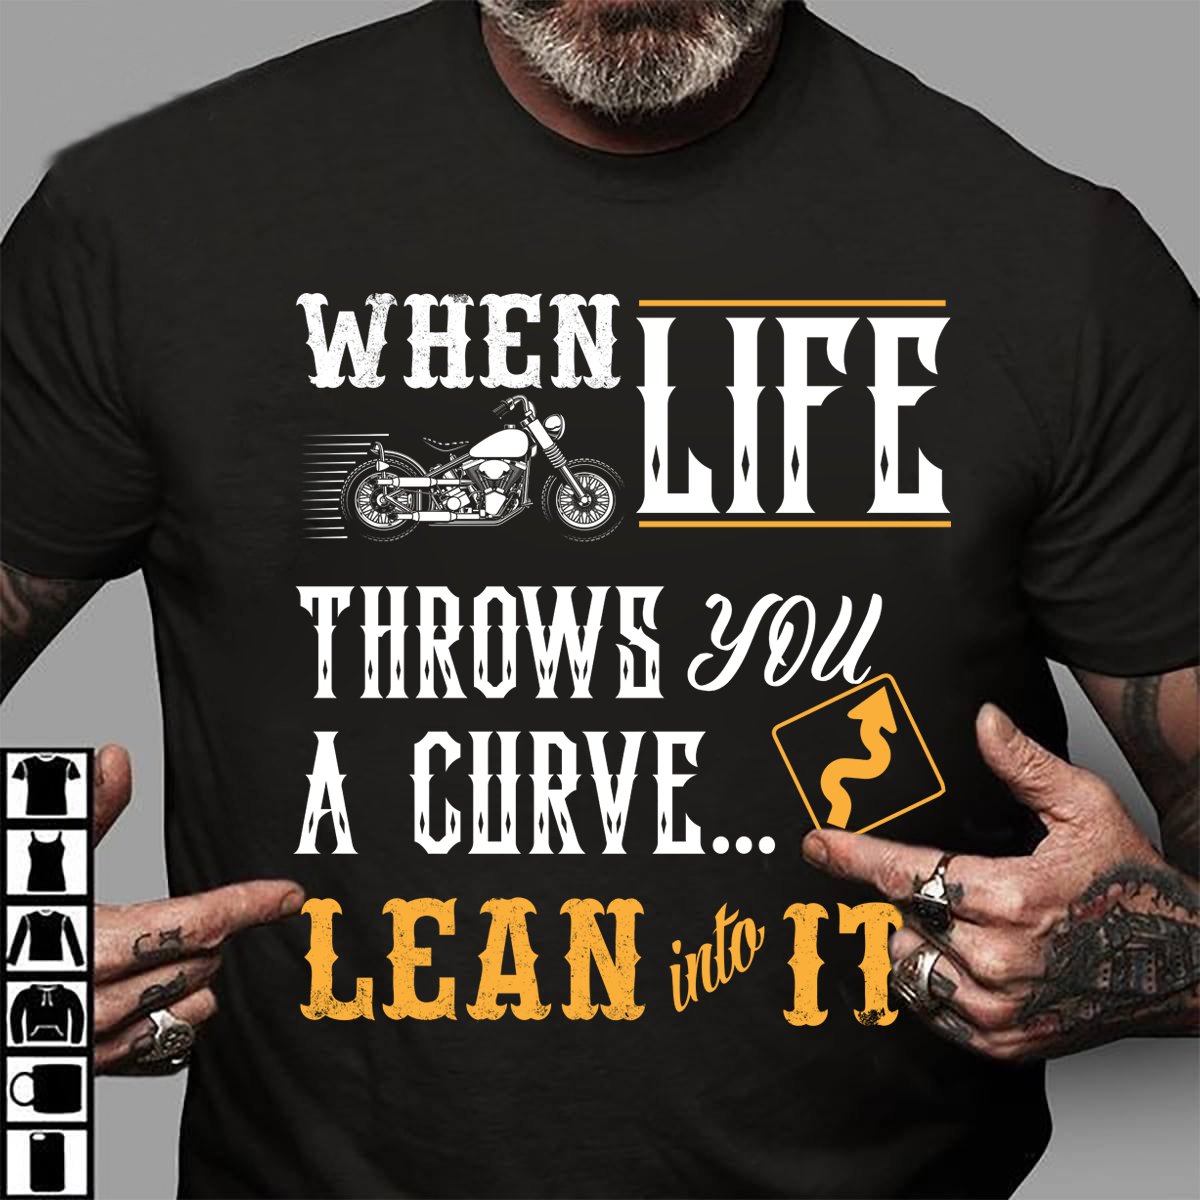 When life throws you a curve lean into it - Motorcycle lover